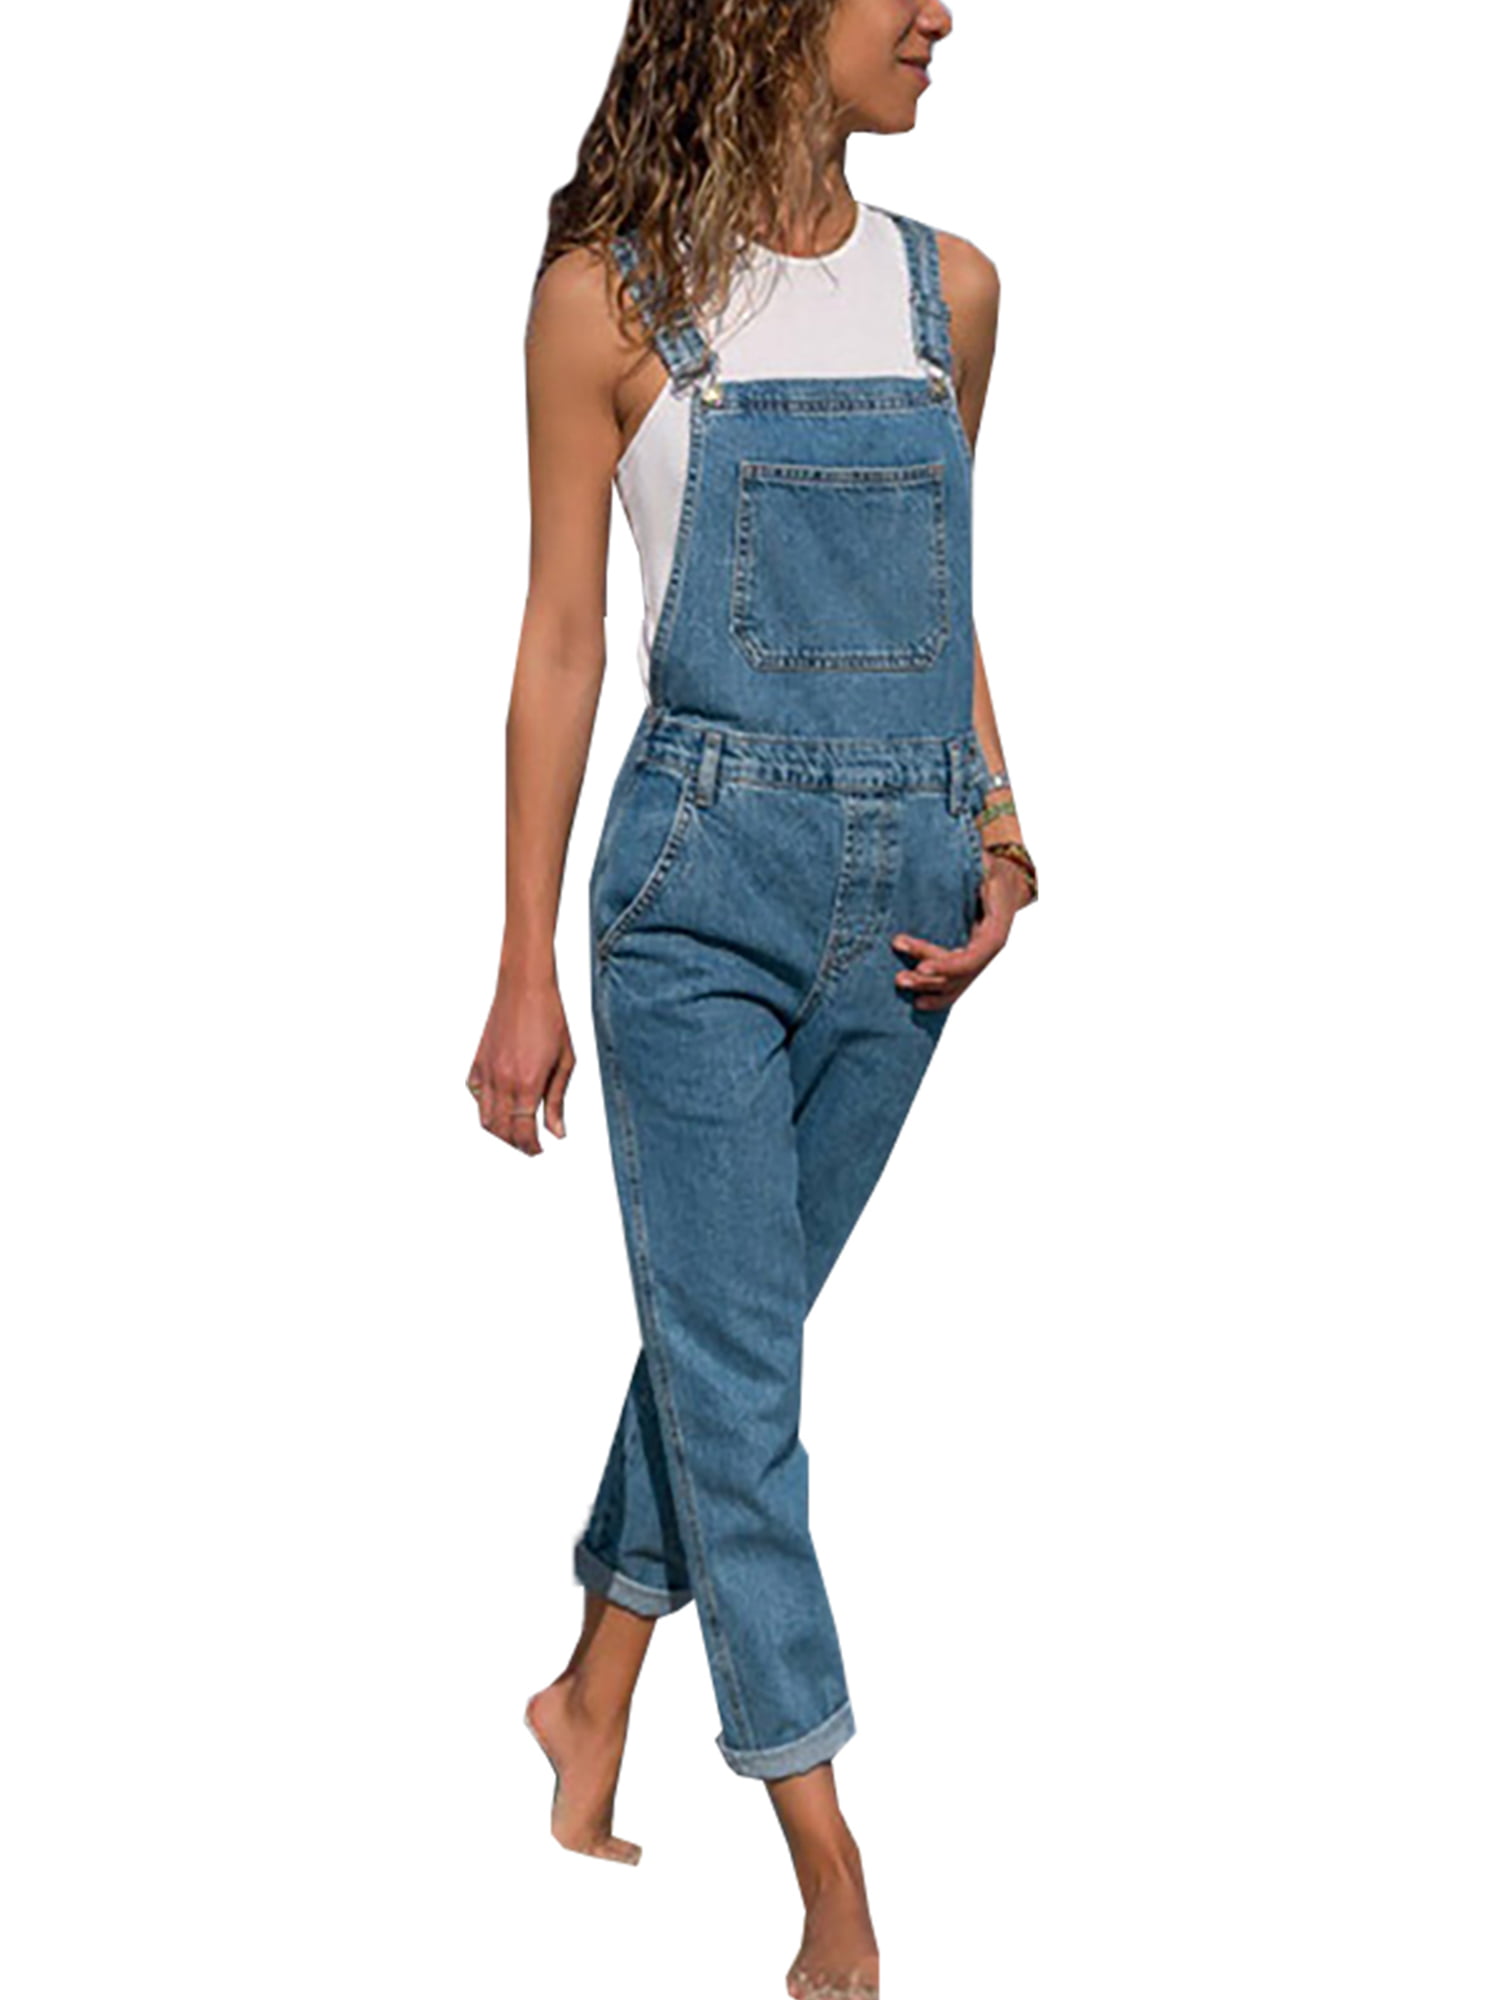 the display at the levi strauss museum showed the dungarees